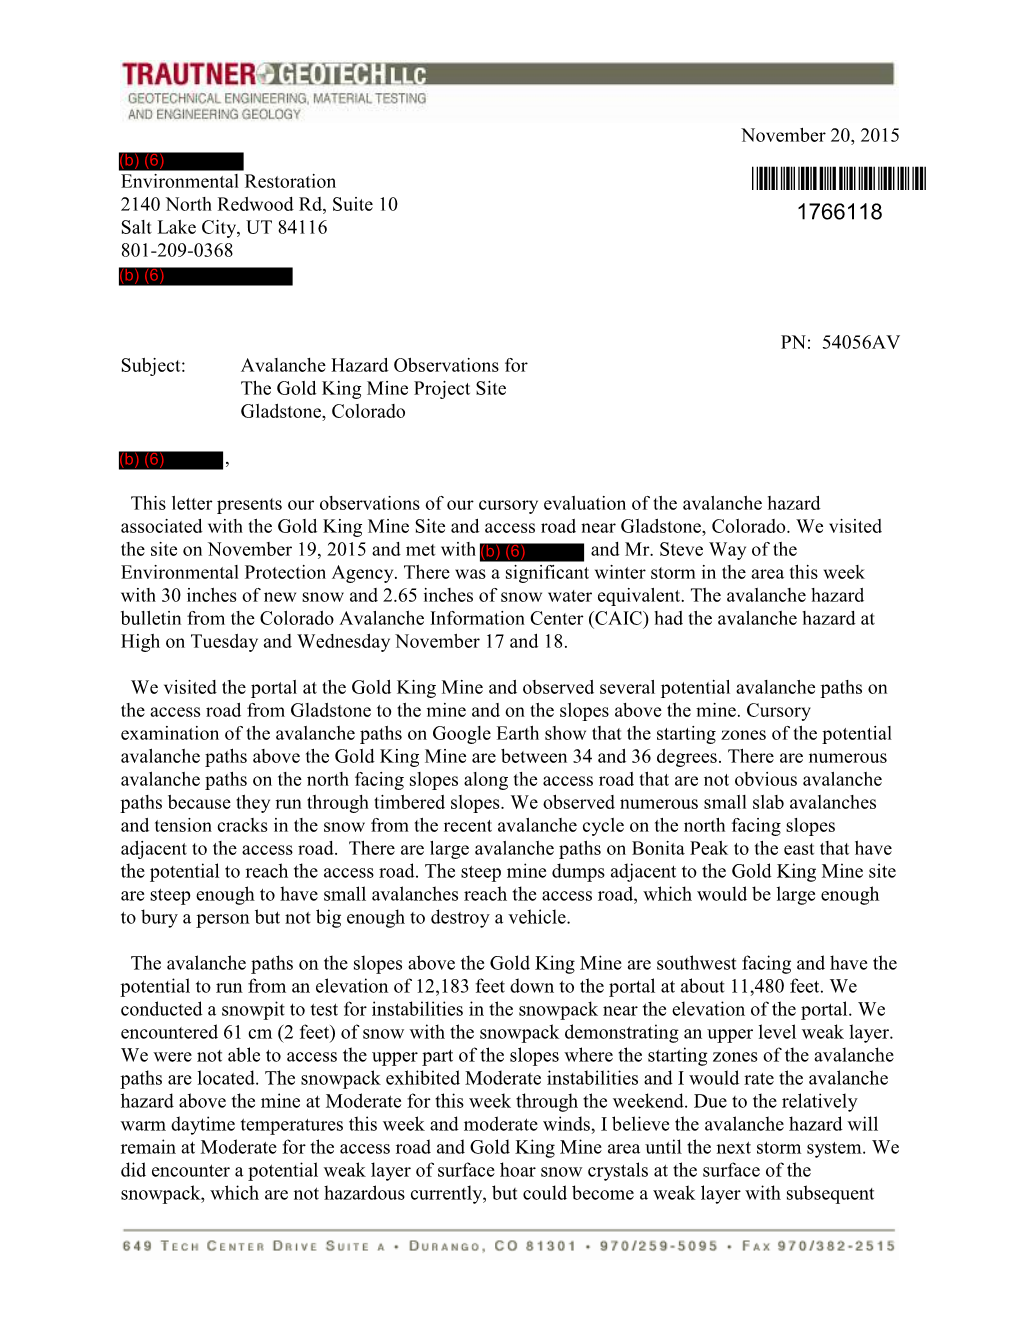 REDACTED Letter Presents Avalanche Hazard Observations For